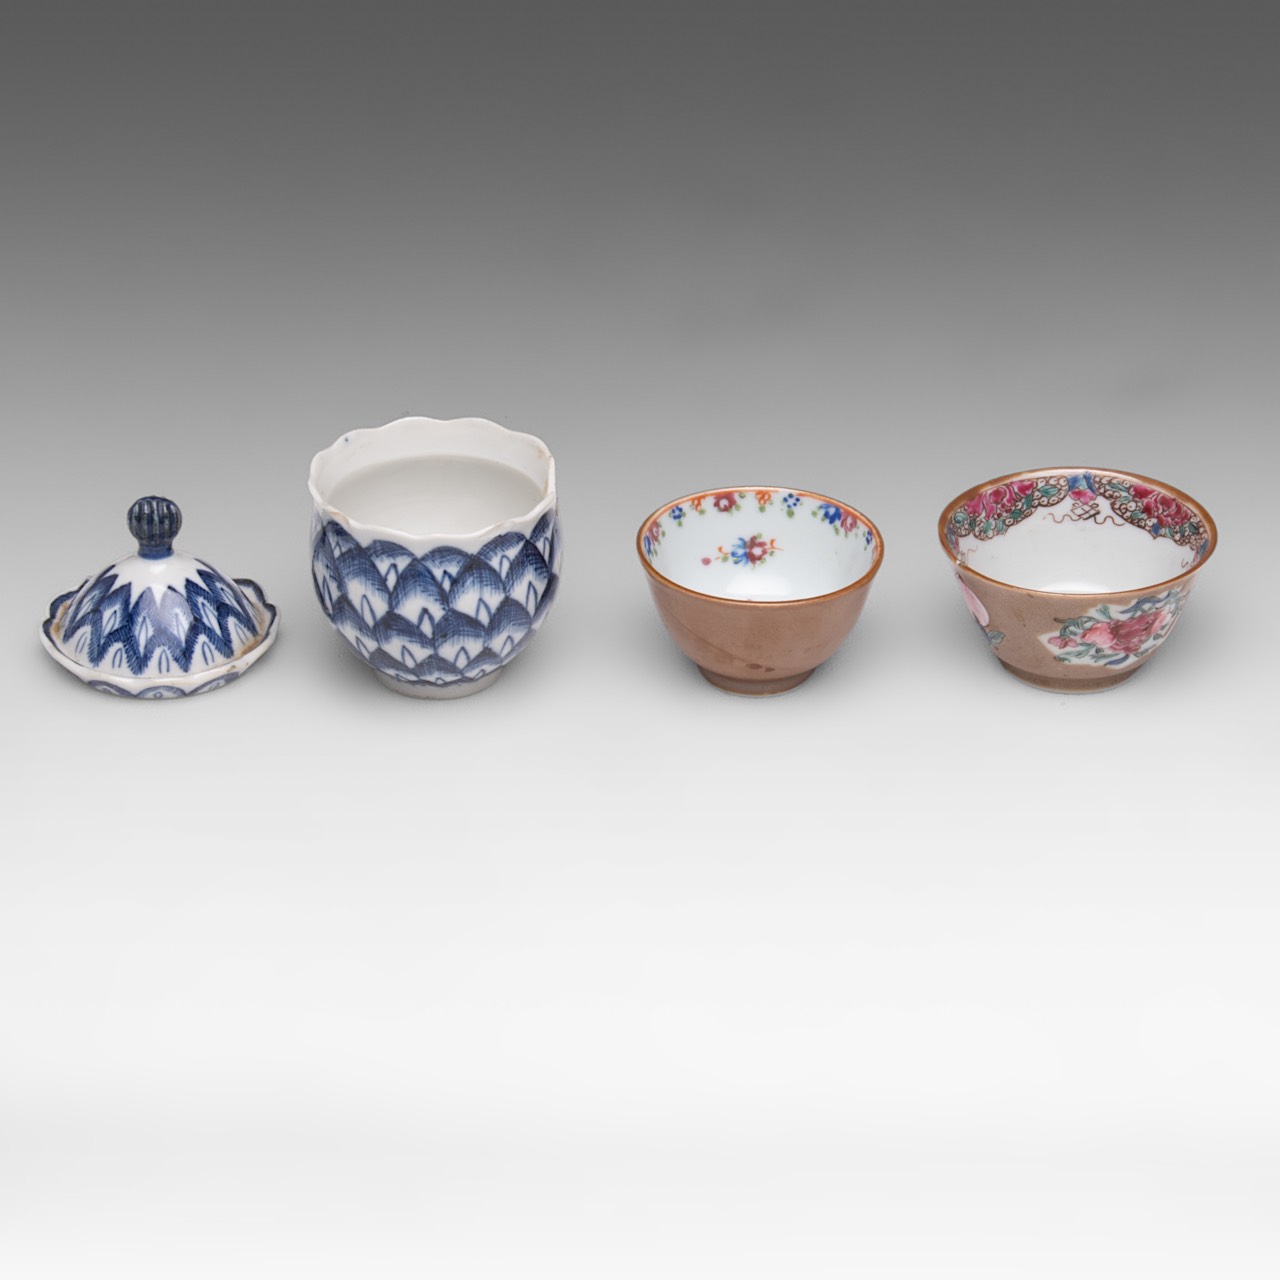 A small collection of Chinese medicine jars, late Qing and Kangxi period - and cafe-au-lait tea ware - Image 13 of 13